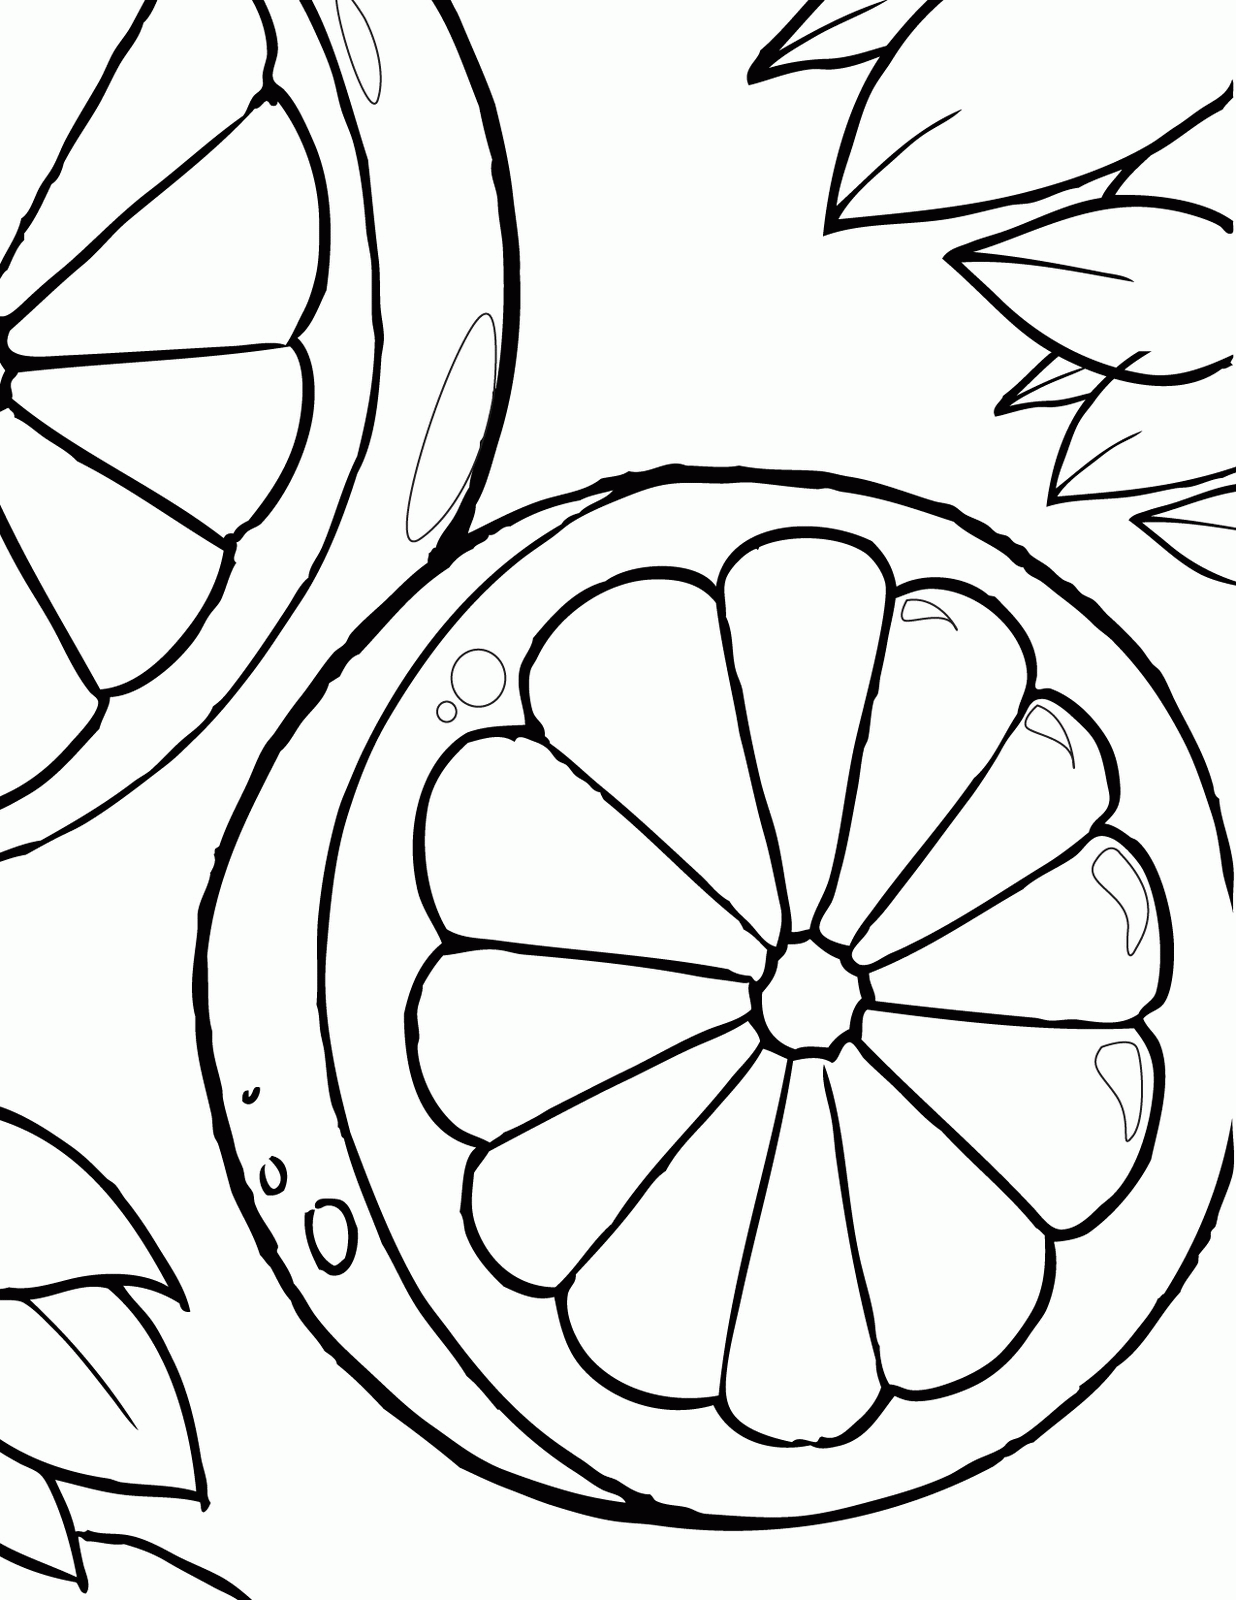 Thing One And Thing Two Coloring Pages | Coloring Pages Gallery